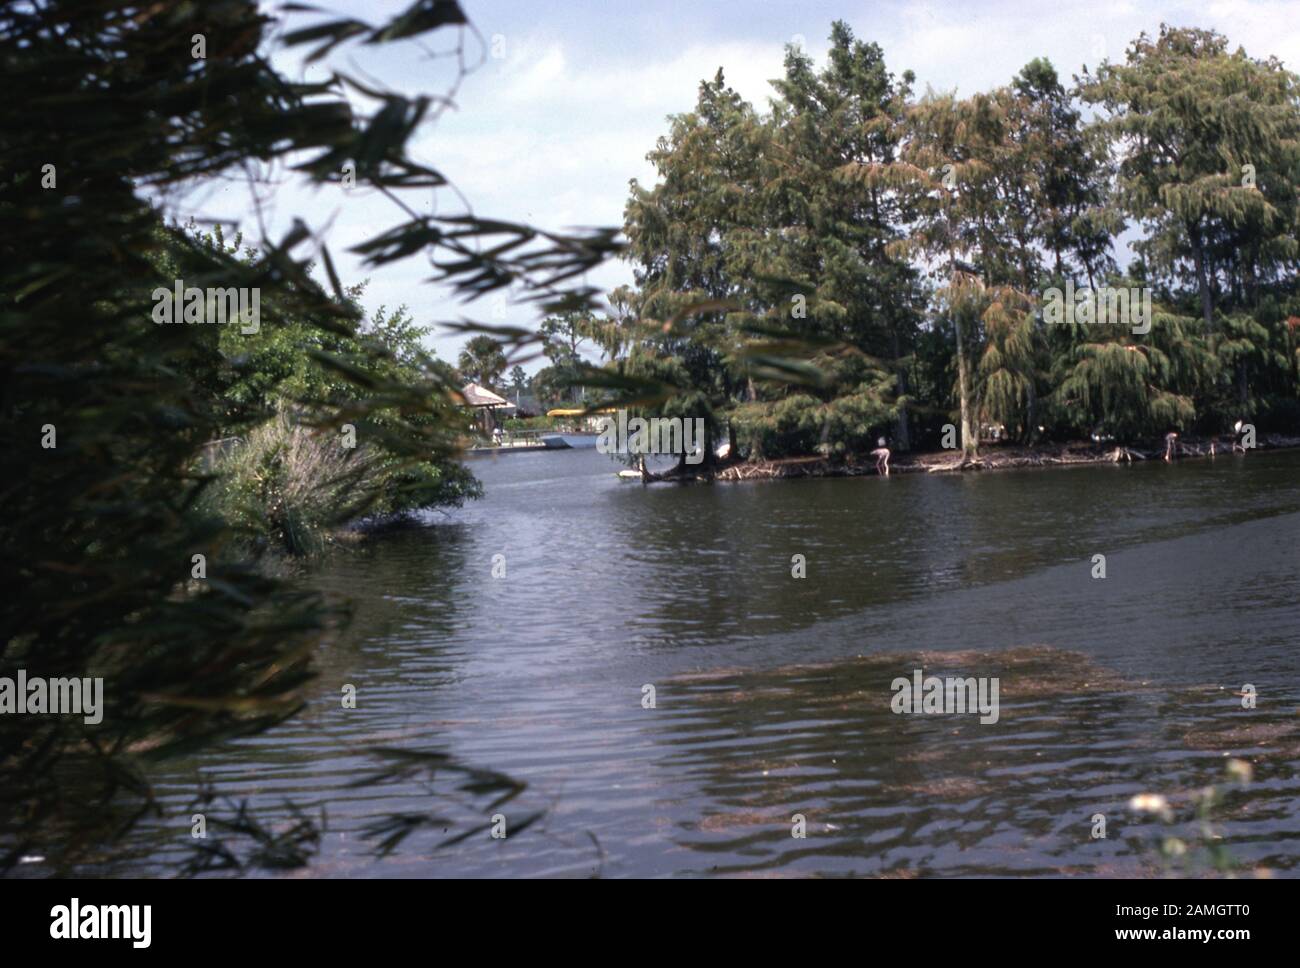 Vernacular photograph taken on a 35mm analog film transparency, believed to depict green trees beside river under white clouds and blue sky during daytime, November 23, 2019. Major topics/objects detected include Water, River, Bank, Tree, Bayou, Lake, Reflection, Riparian Forest and Nature. () Stock Photo